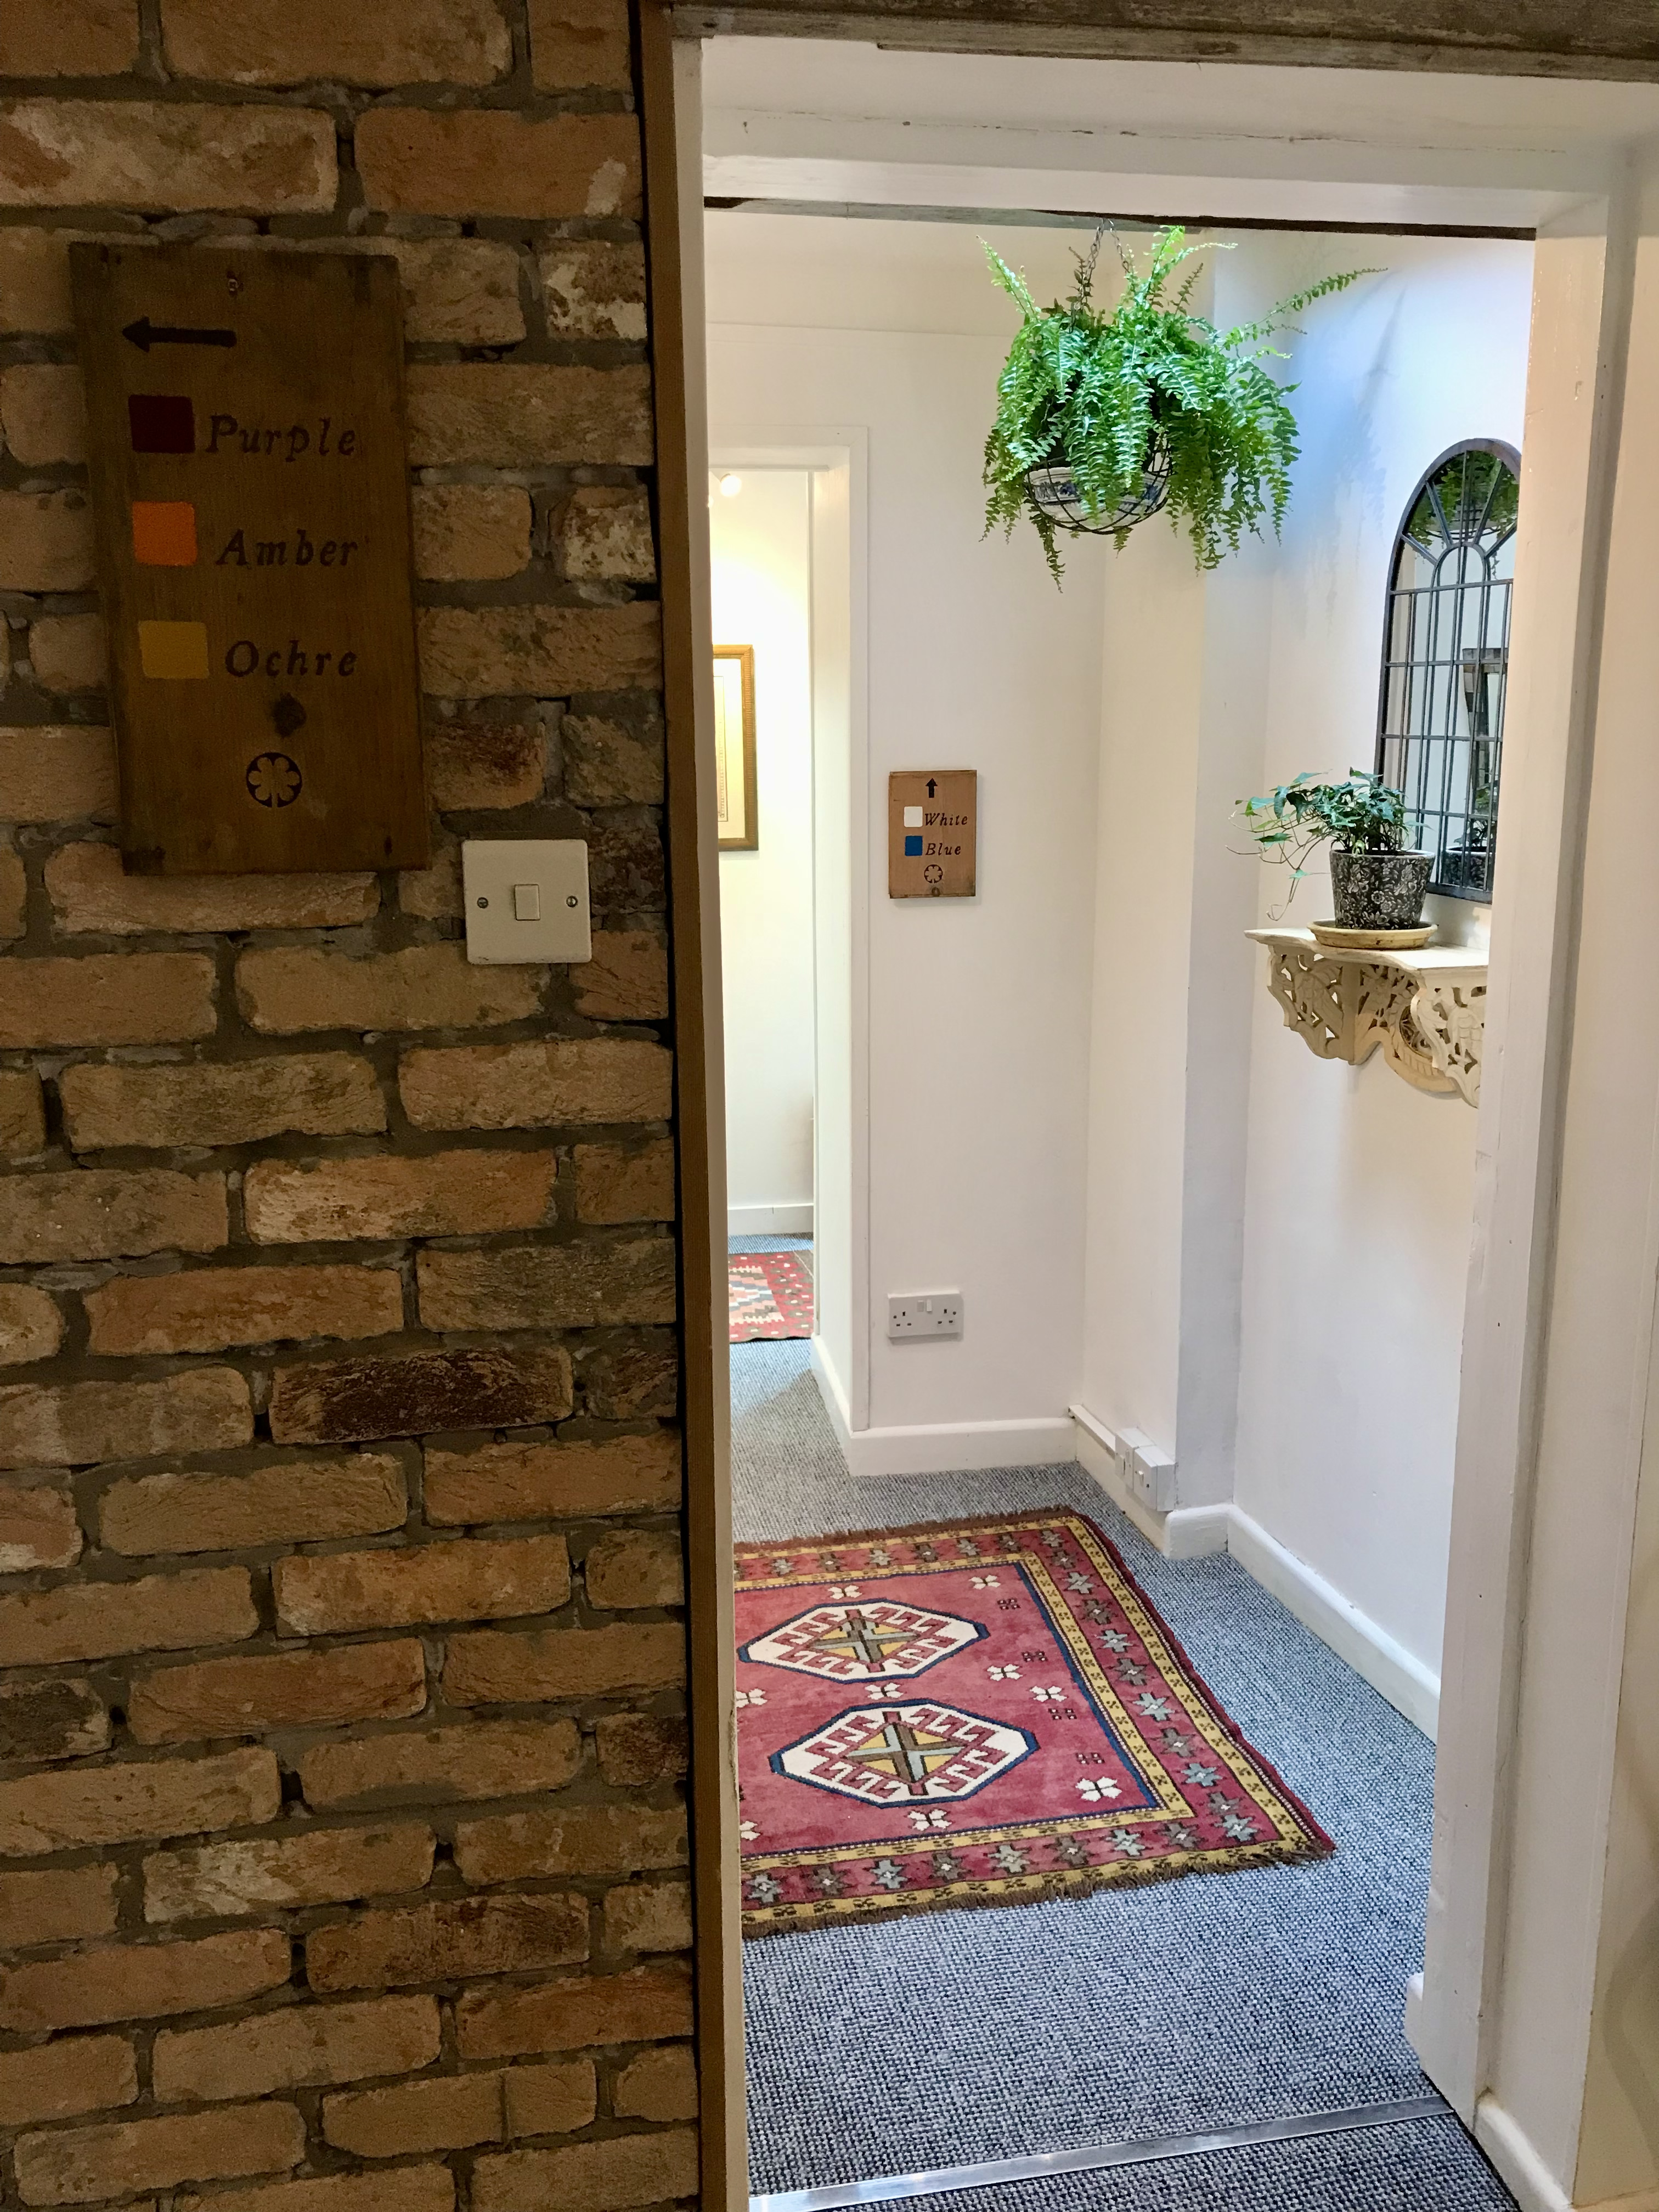 Hallway with exposed brickwork and hanging plants